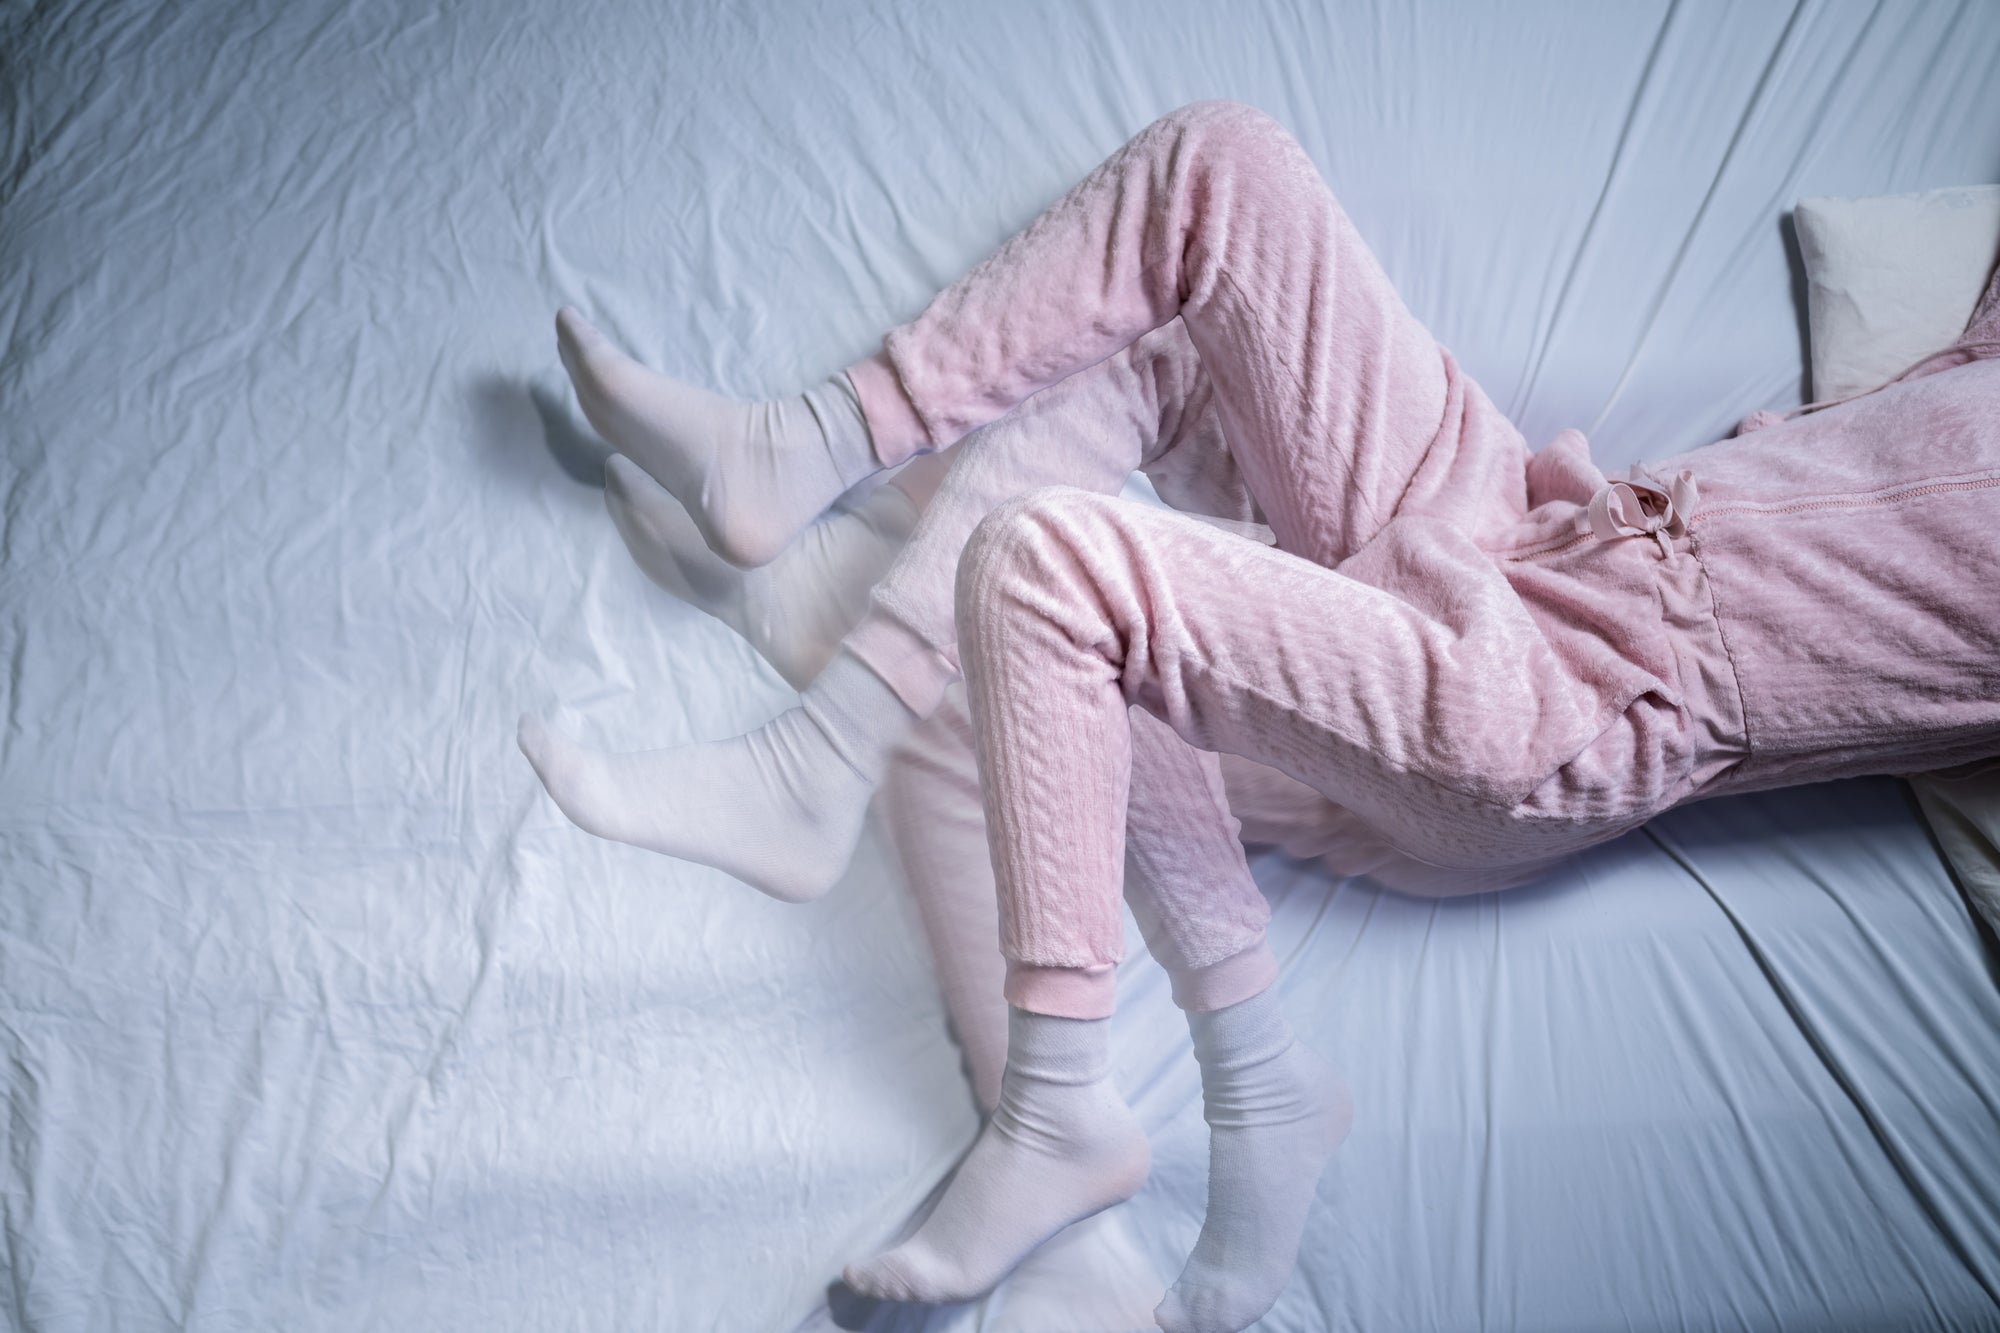 13 Helpful Ways to Relieve Restless Legs in Bed